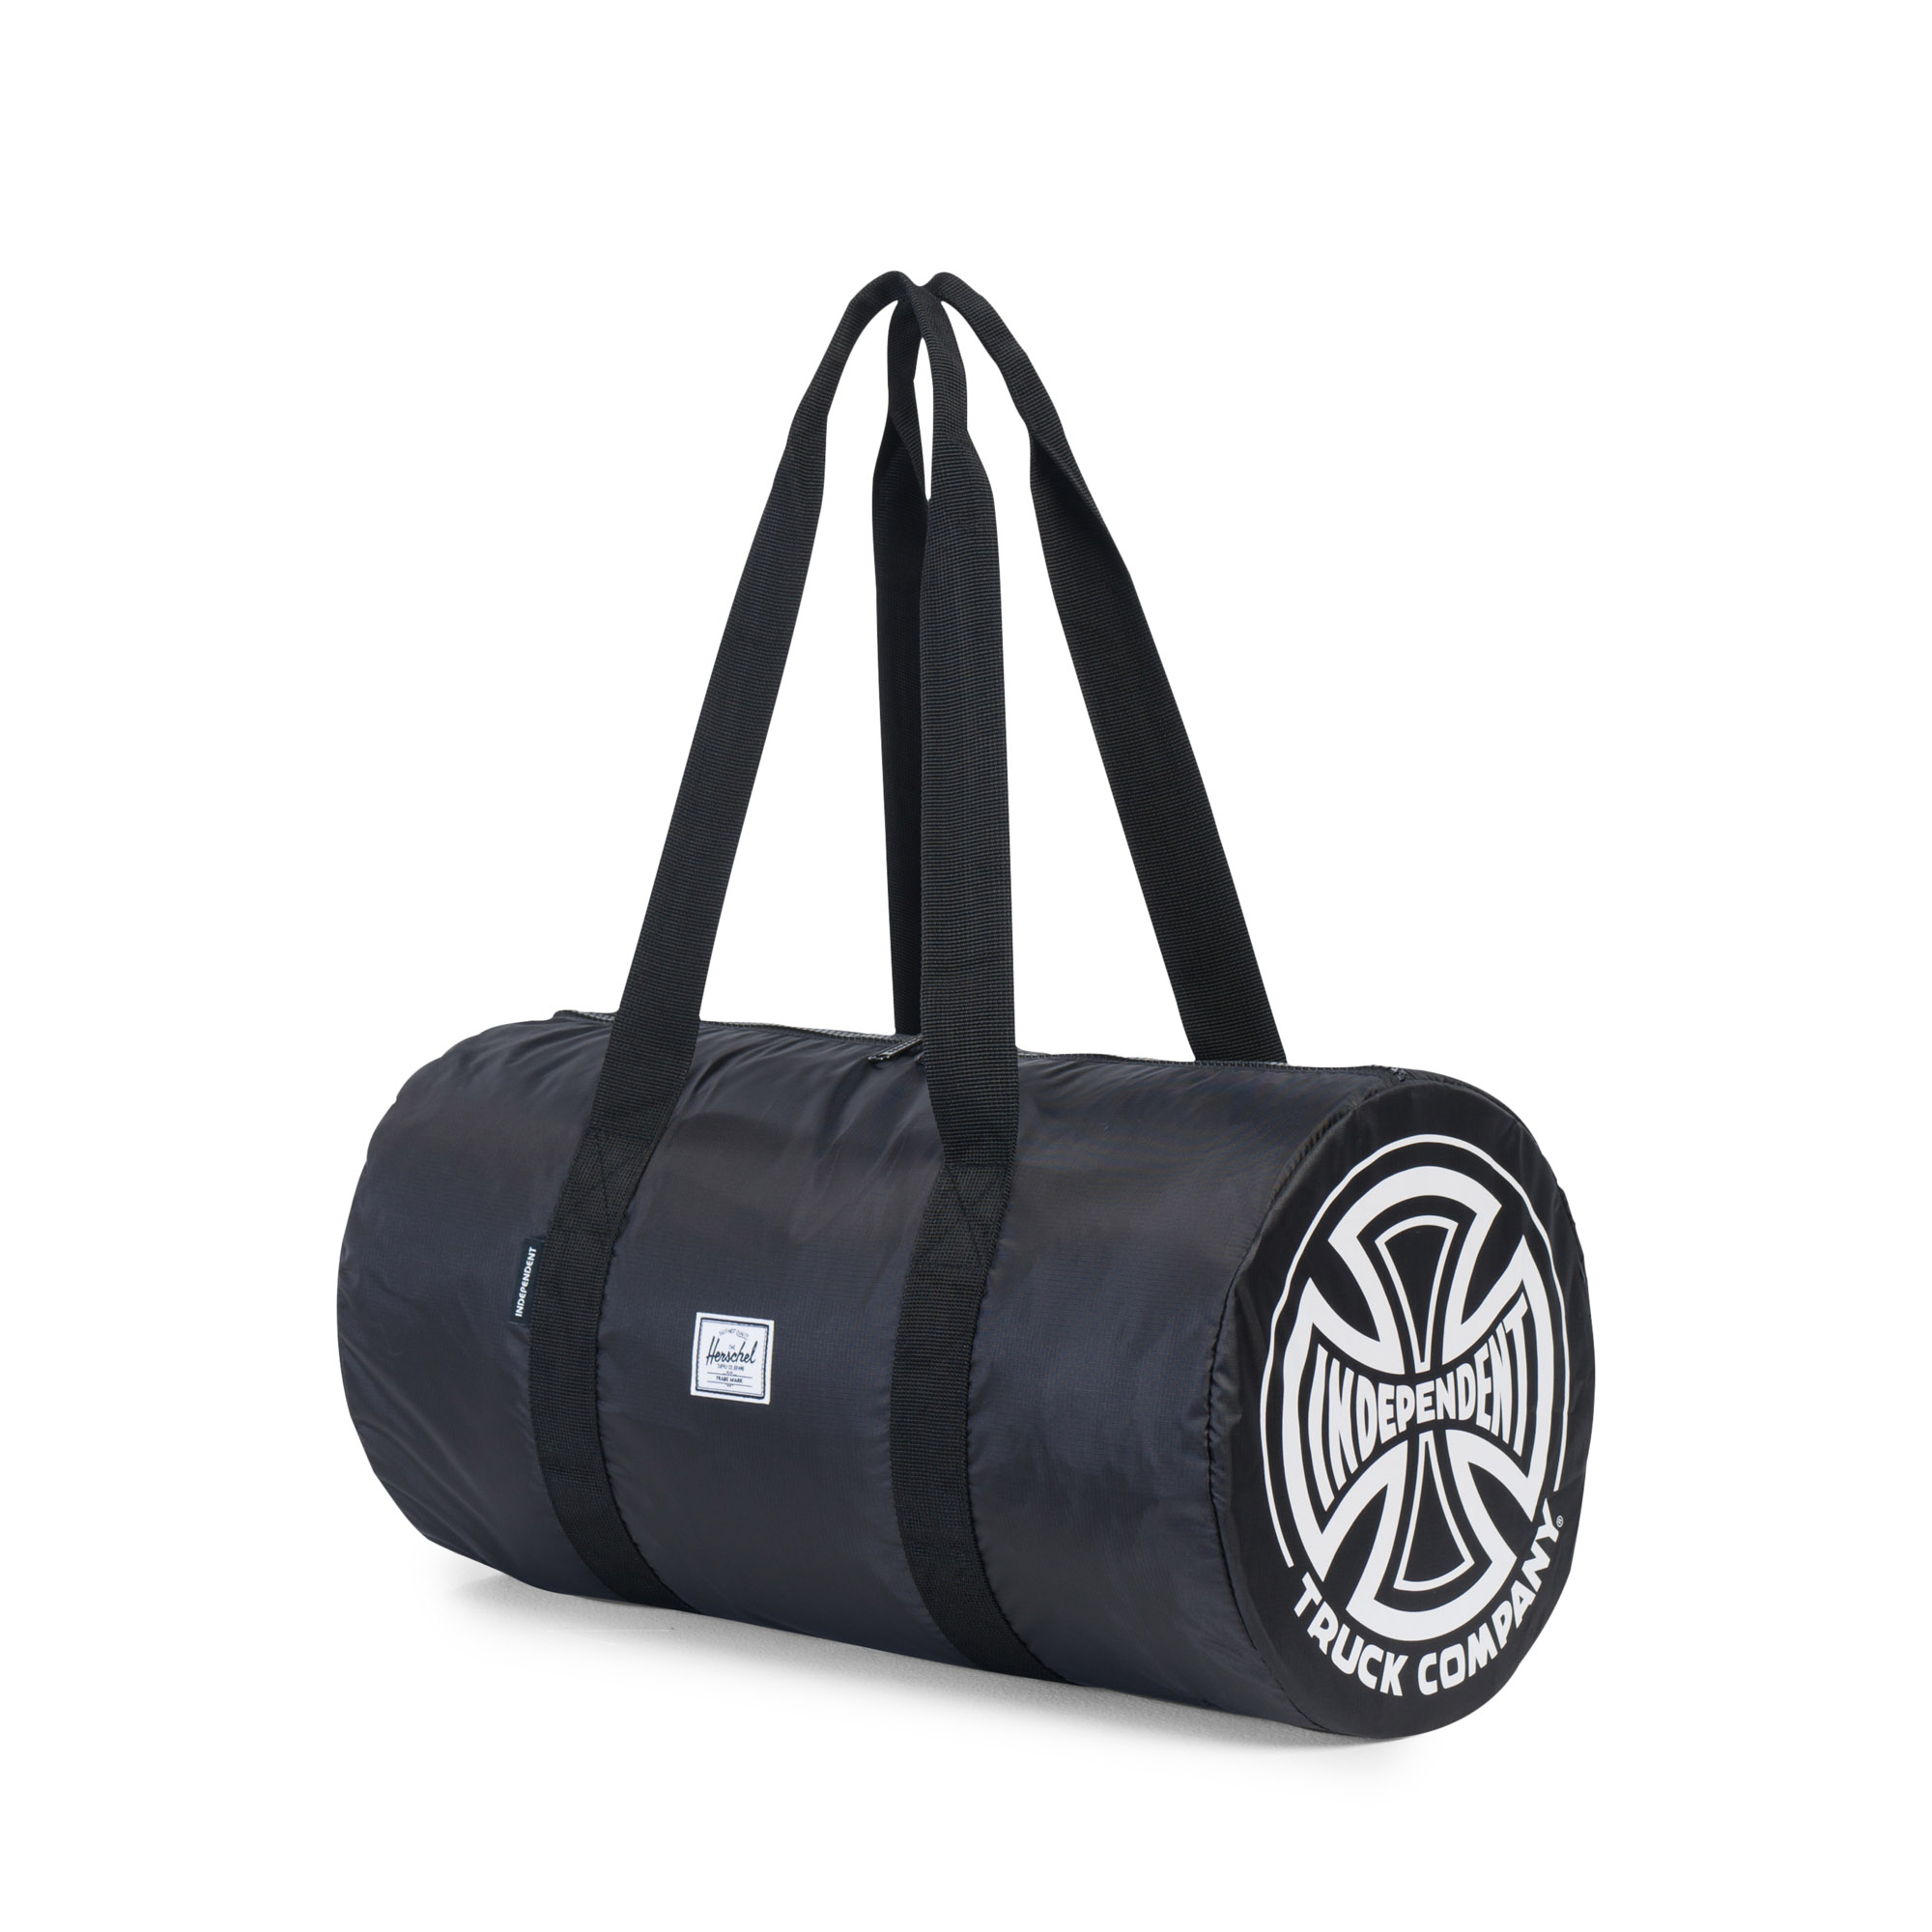 Packable Duffle Classic in Black Womens Bags Duffel bags and weekend bags Herschel Supply Co 